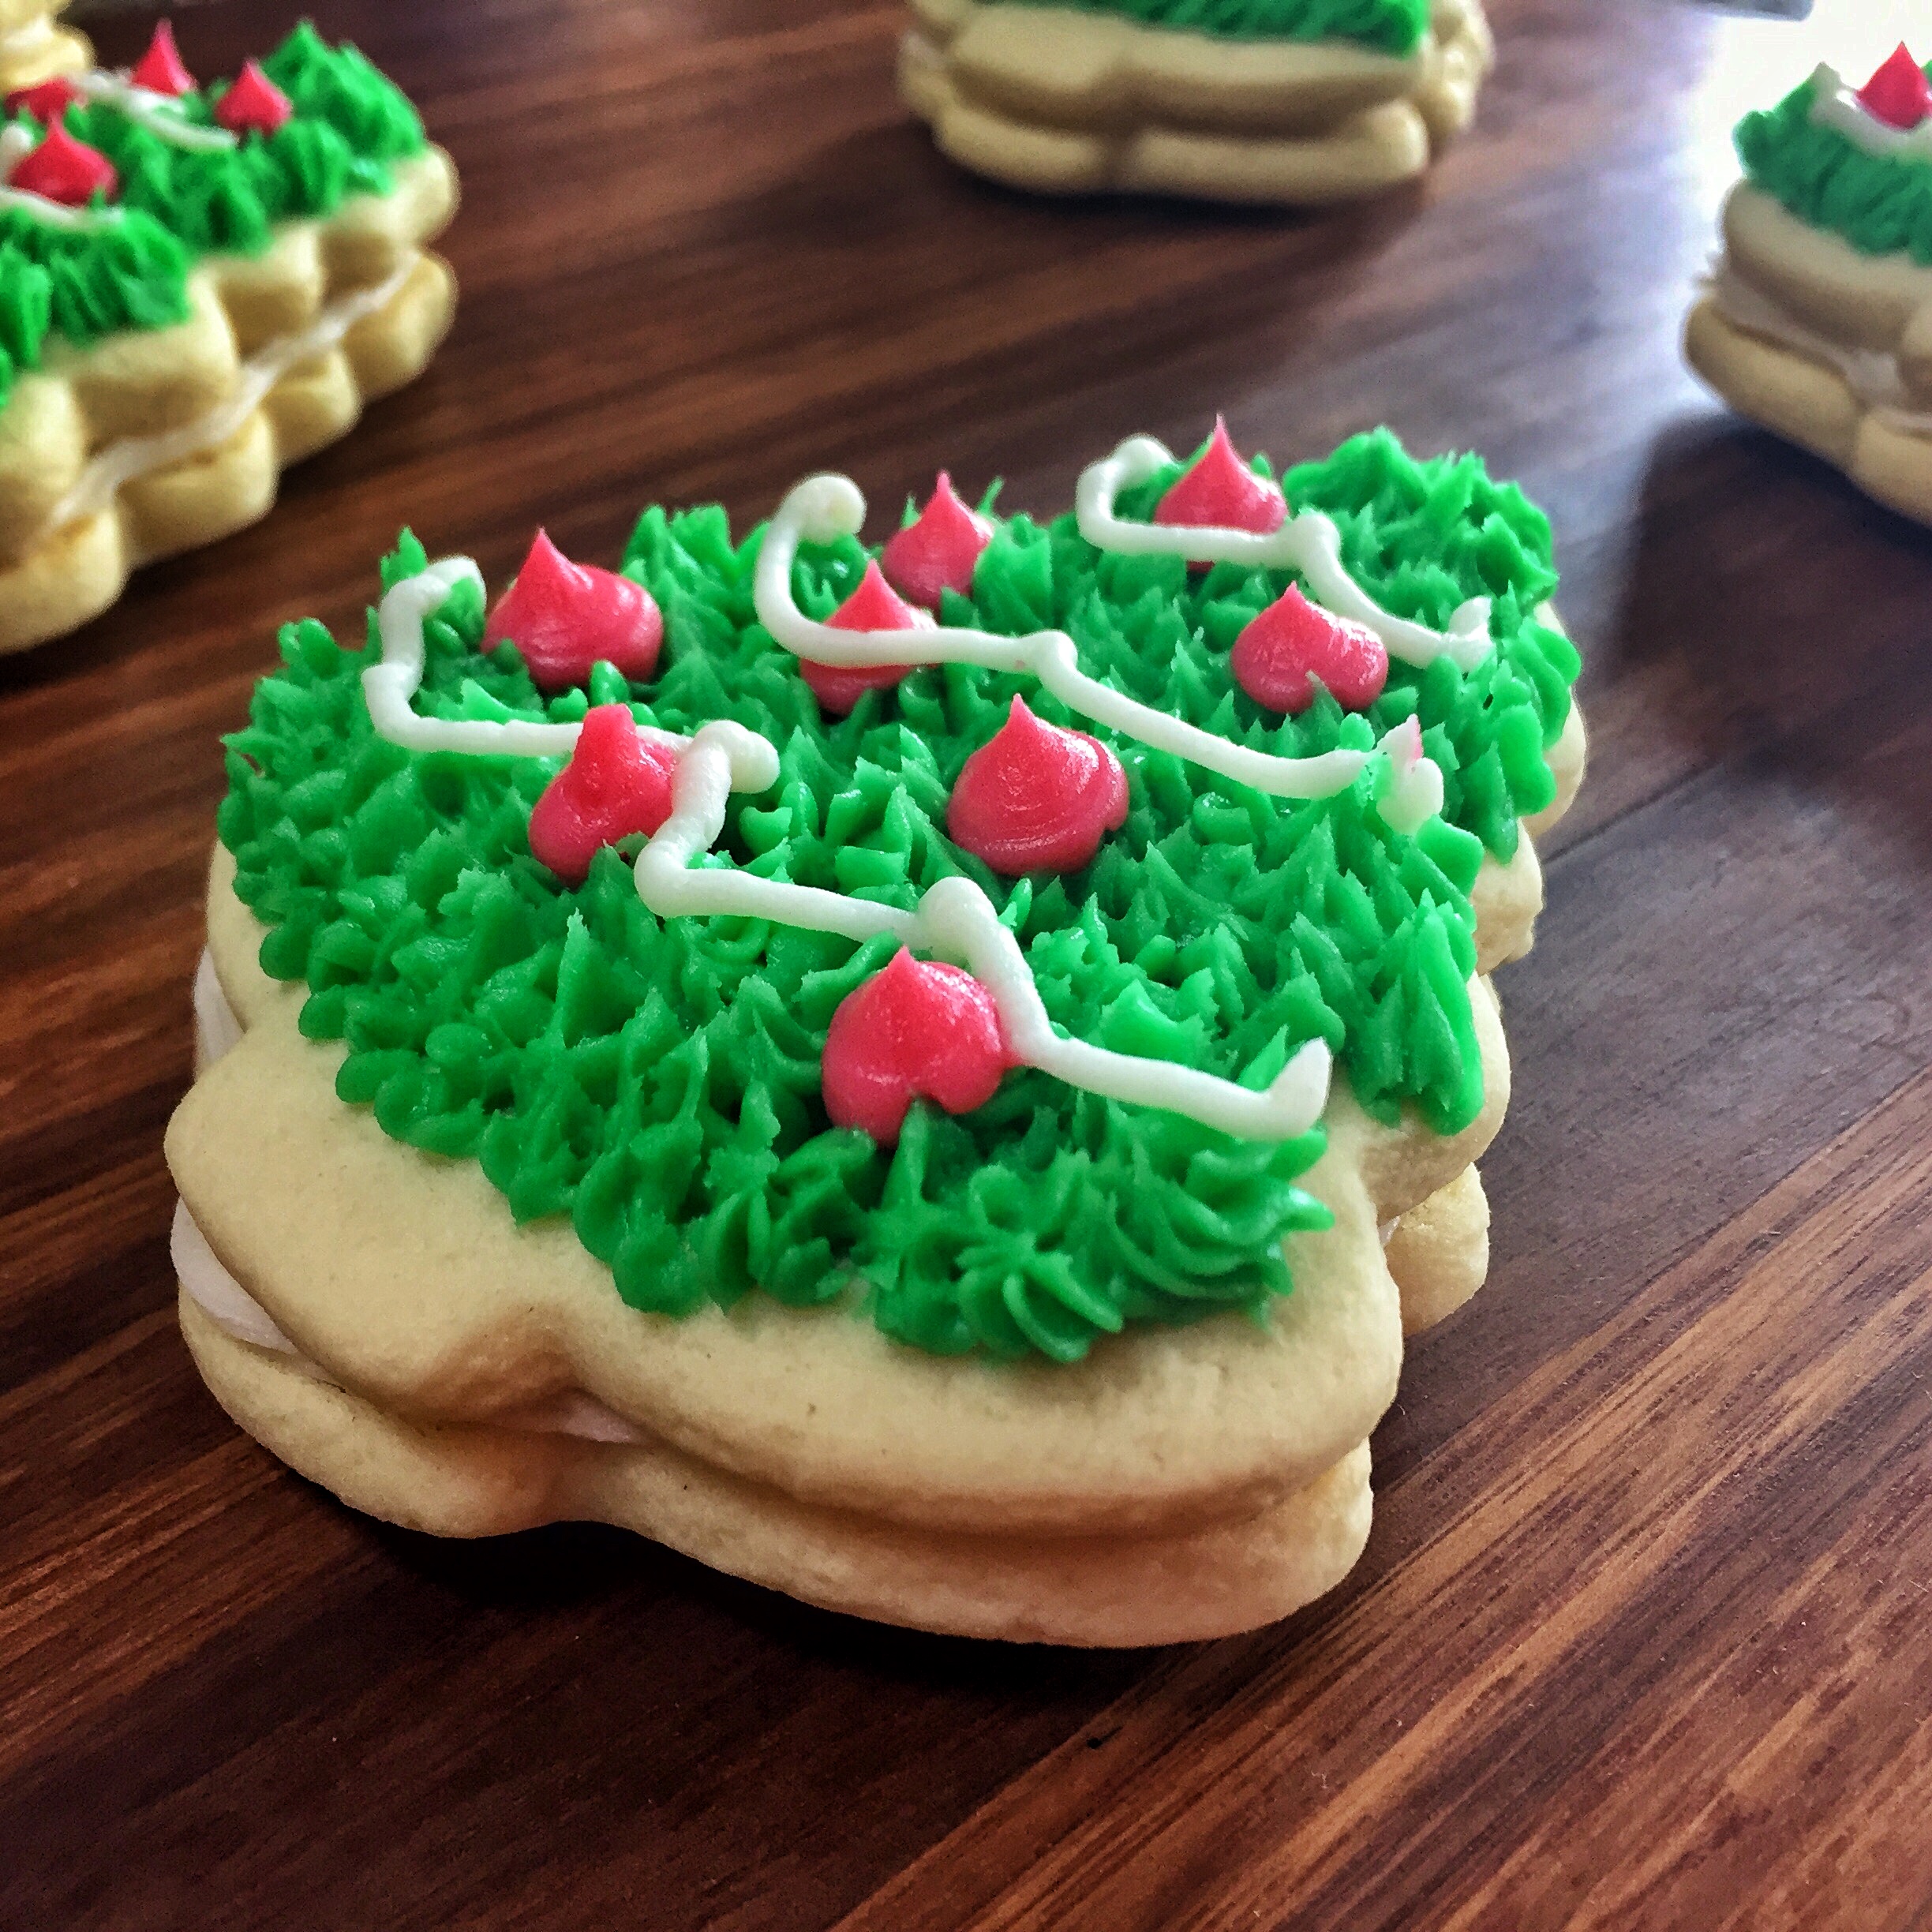 Sugar cookies with real buttercream frosting are sure to get you in the holiday spirit.